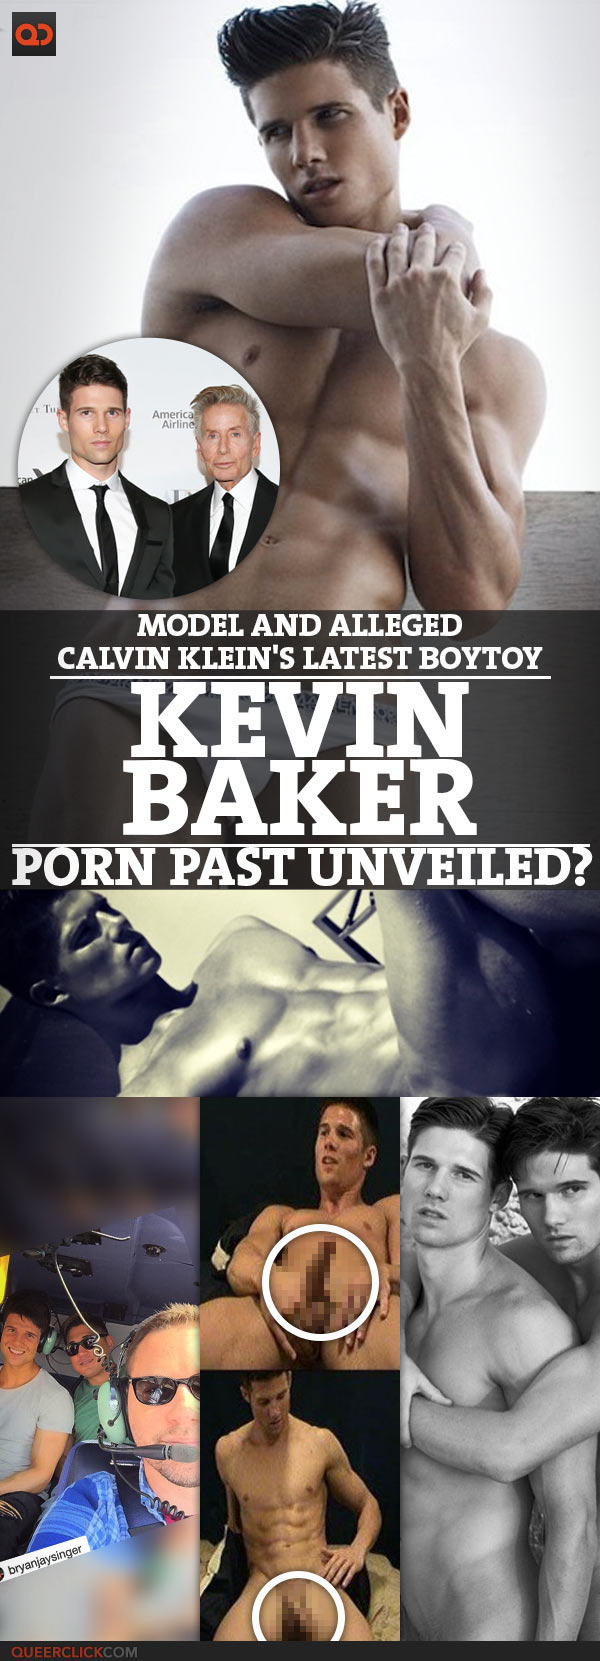 Kevin Baker, Model And Alleged Calvin Klein's Latest BoyToy, Porn Past Unveiled?